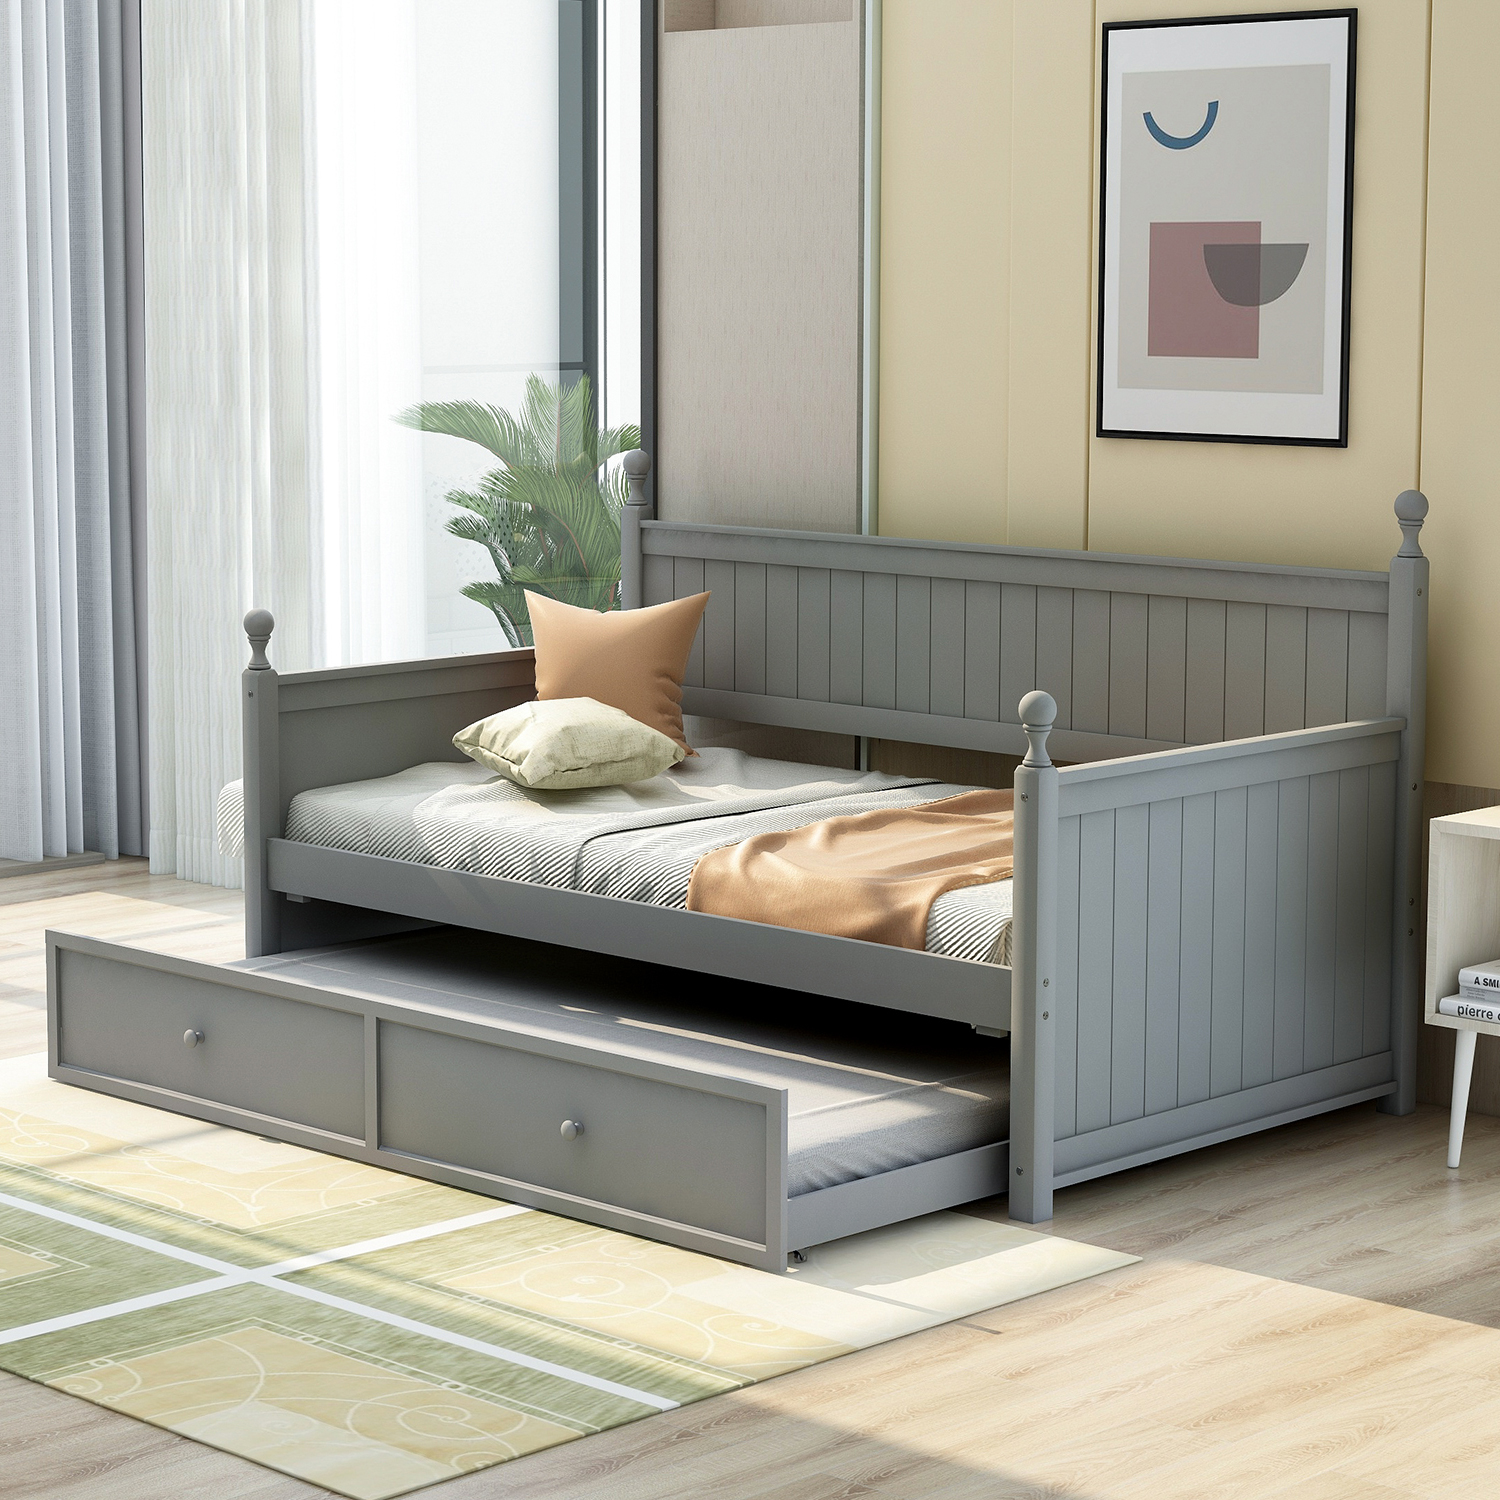 Kepooman Twin Size Modern Wooden Daybed Frame with Twin Size Trundle & Headboard for Bedroom Dorm, 80.5" x 42.1" x 45.41", Gray - image 2 of 14